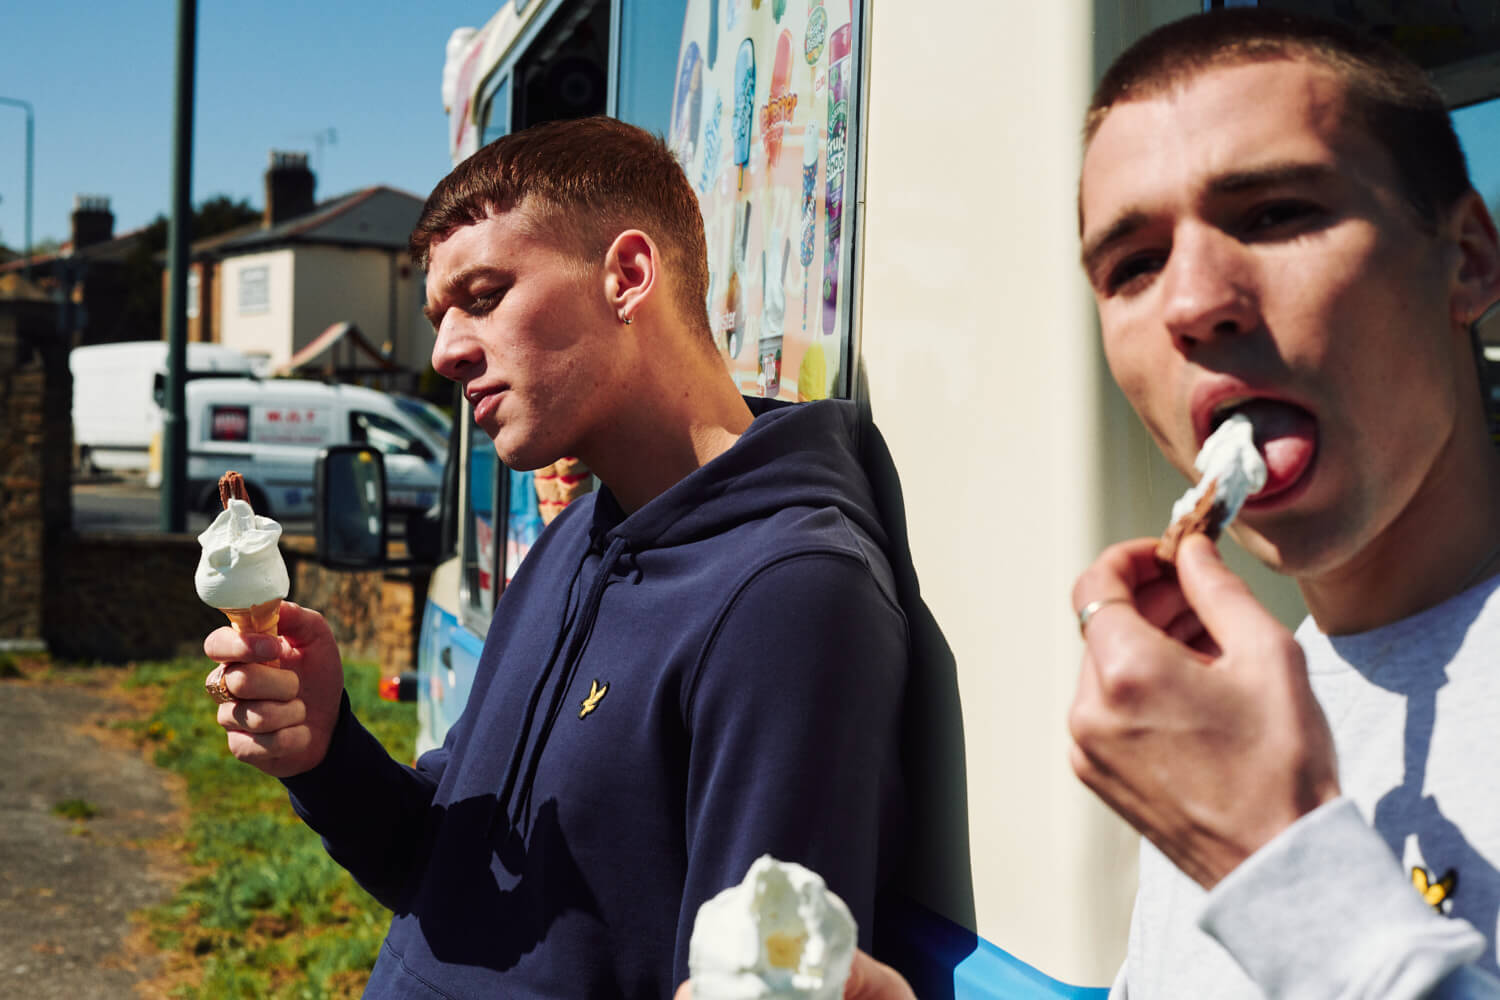  lads lick ice creams by  lifestyle photographer Tim Cole 